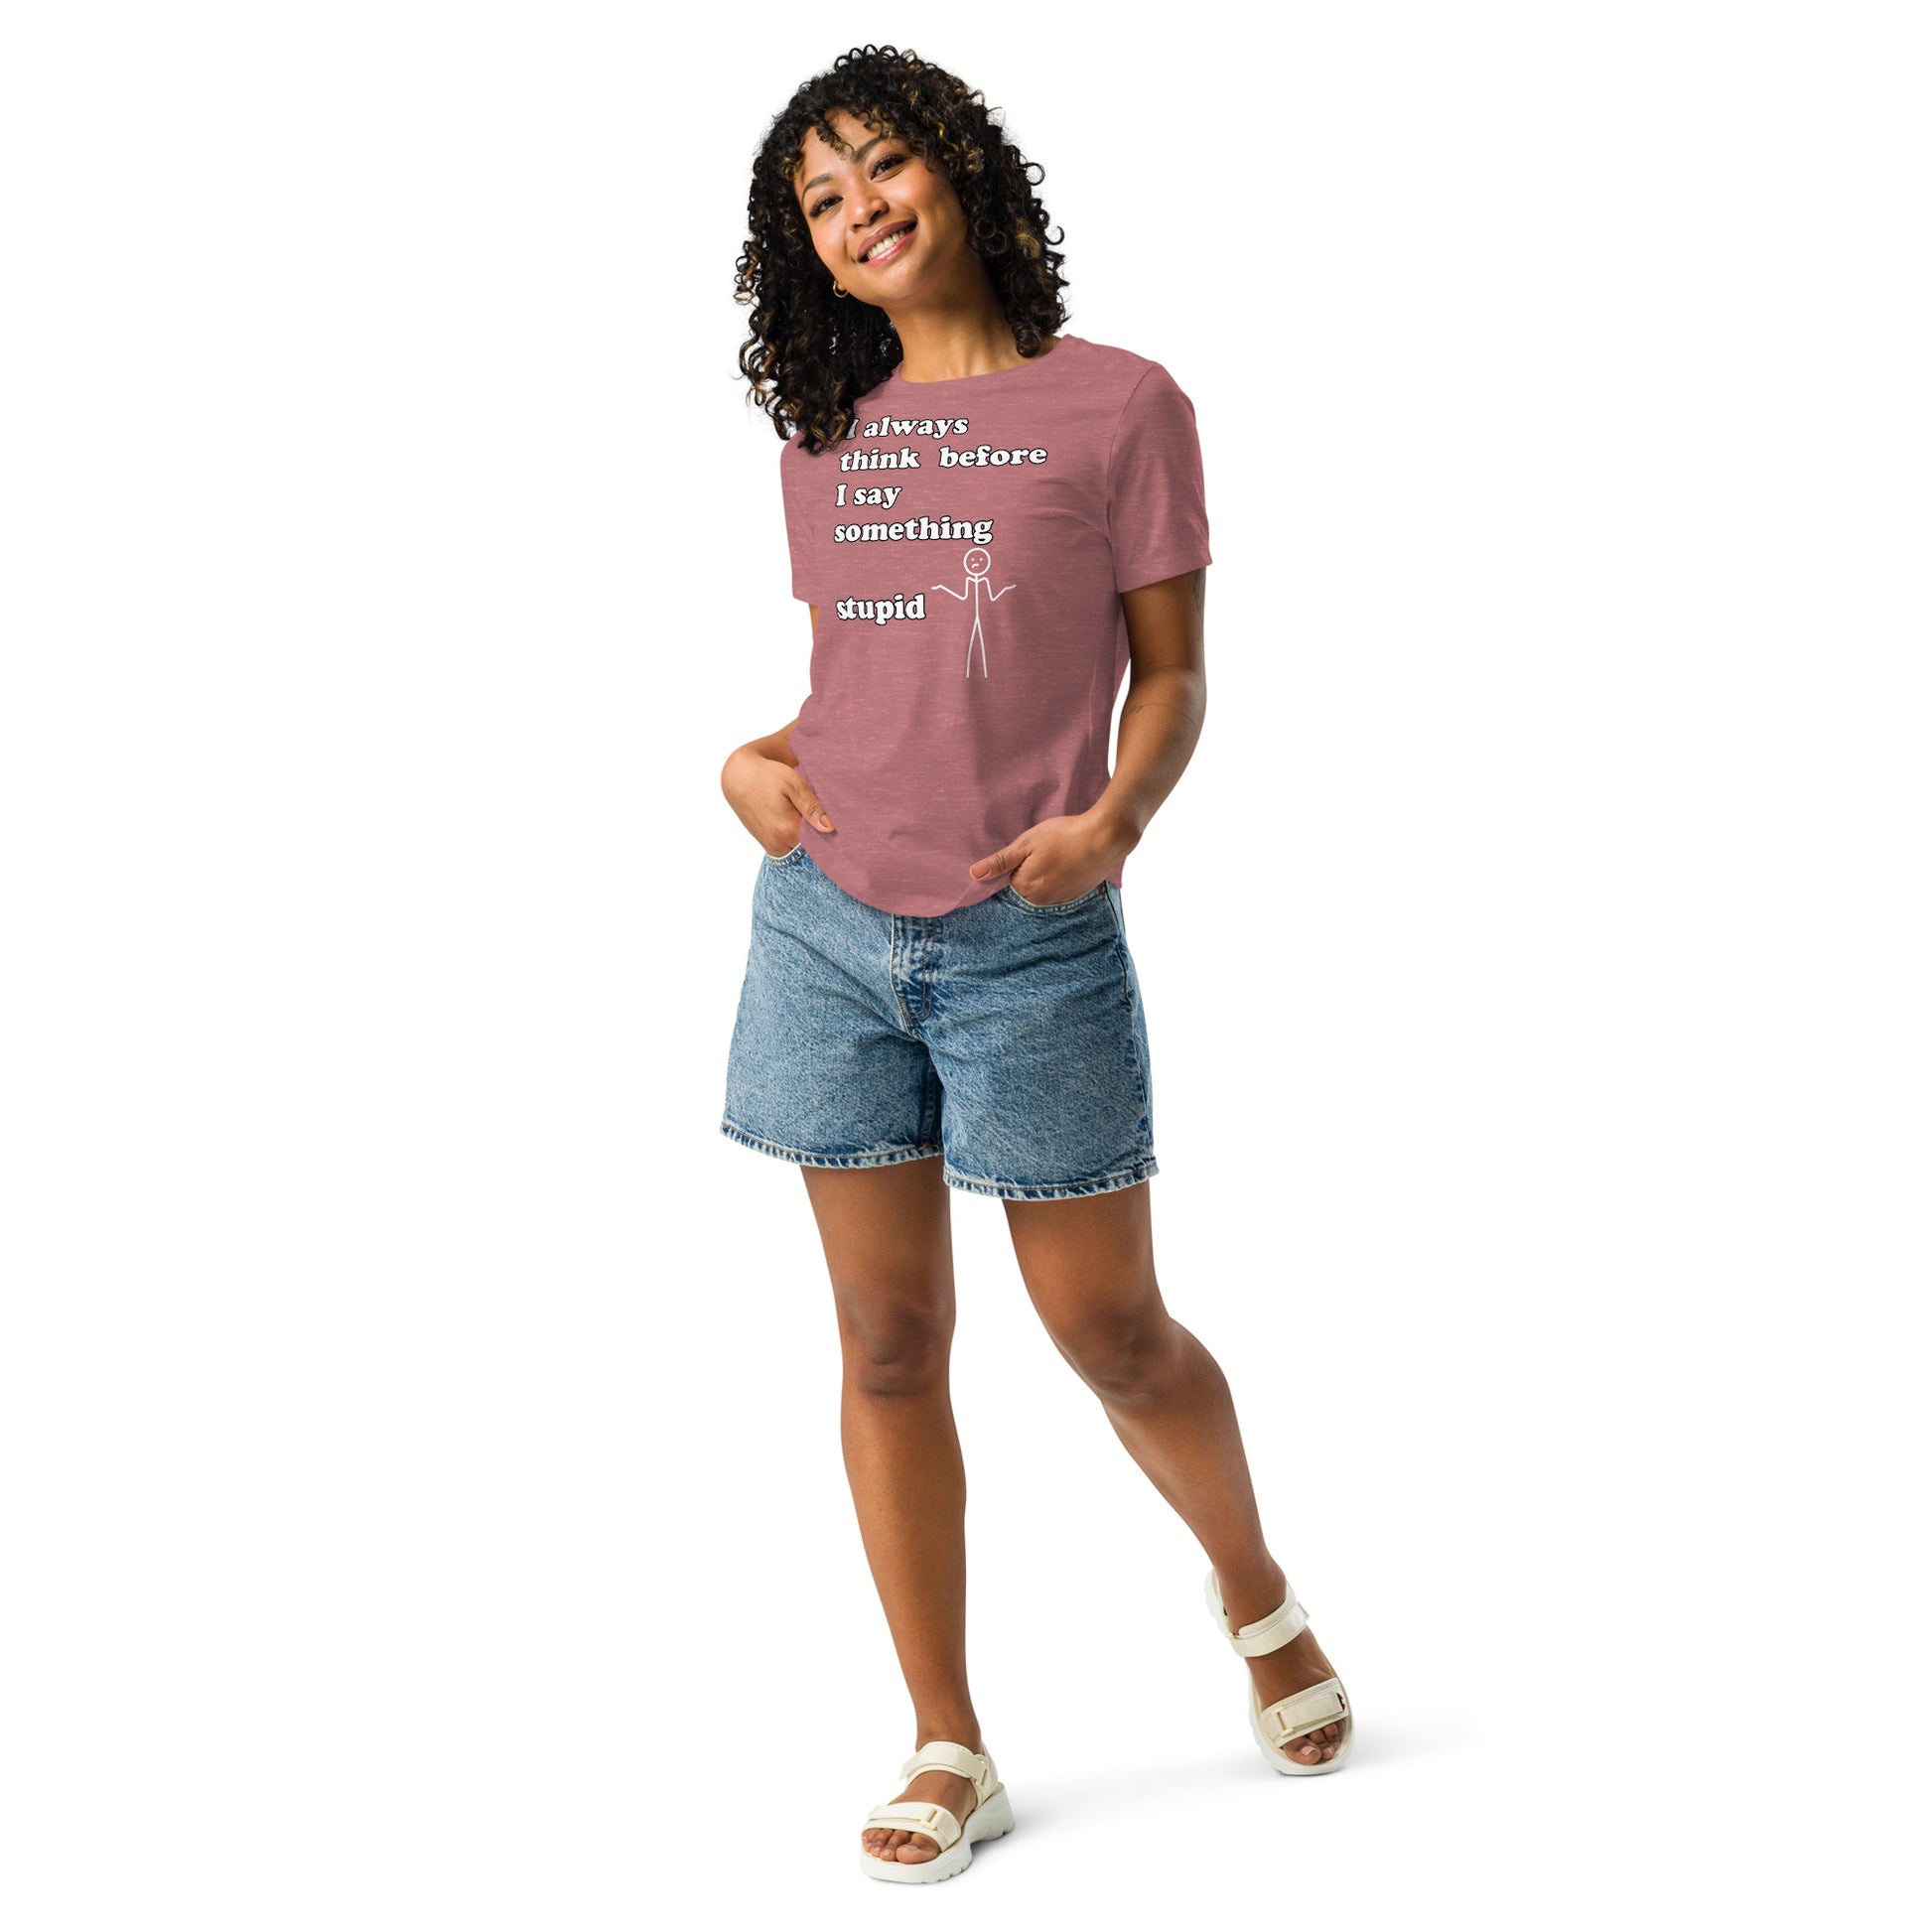 Woman with mauve t-shirt with text "I always think before I say something stupid"